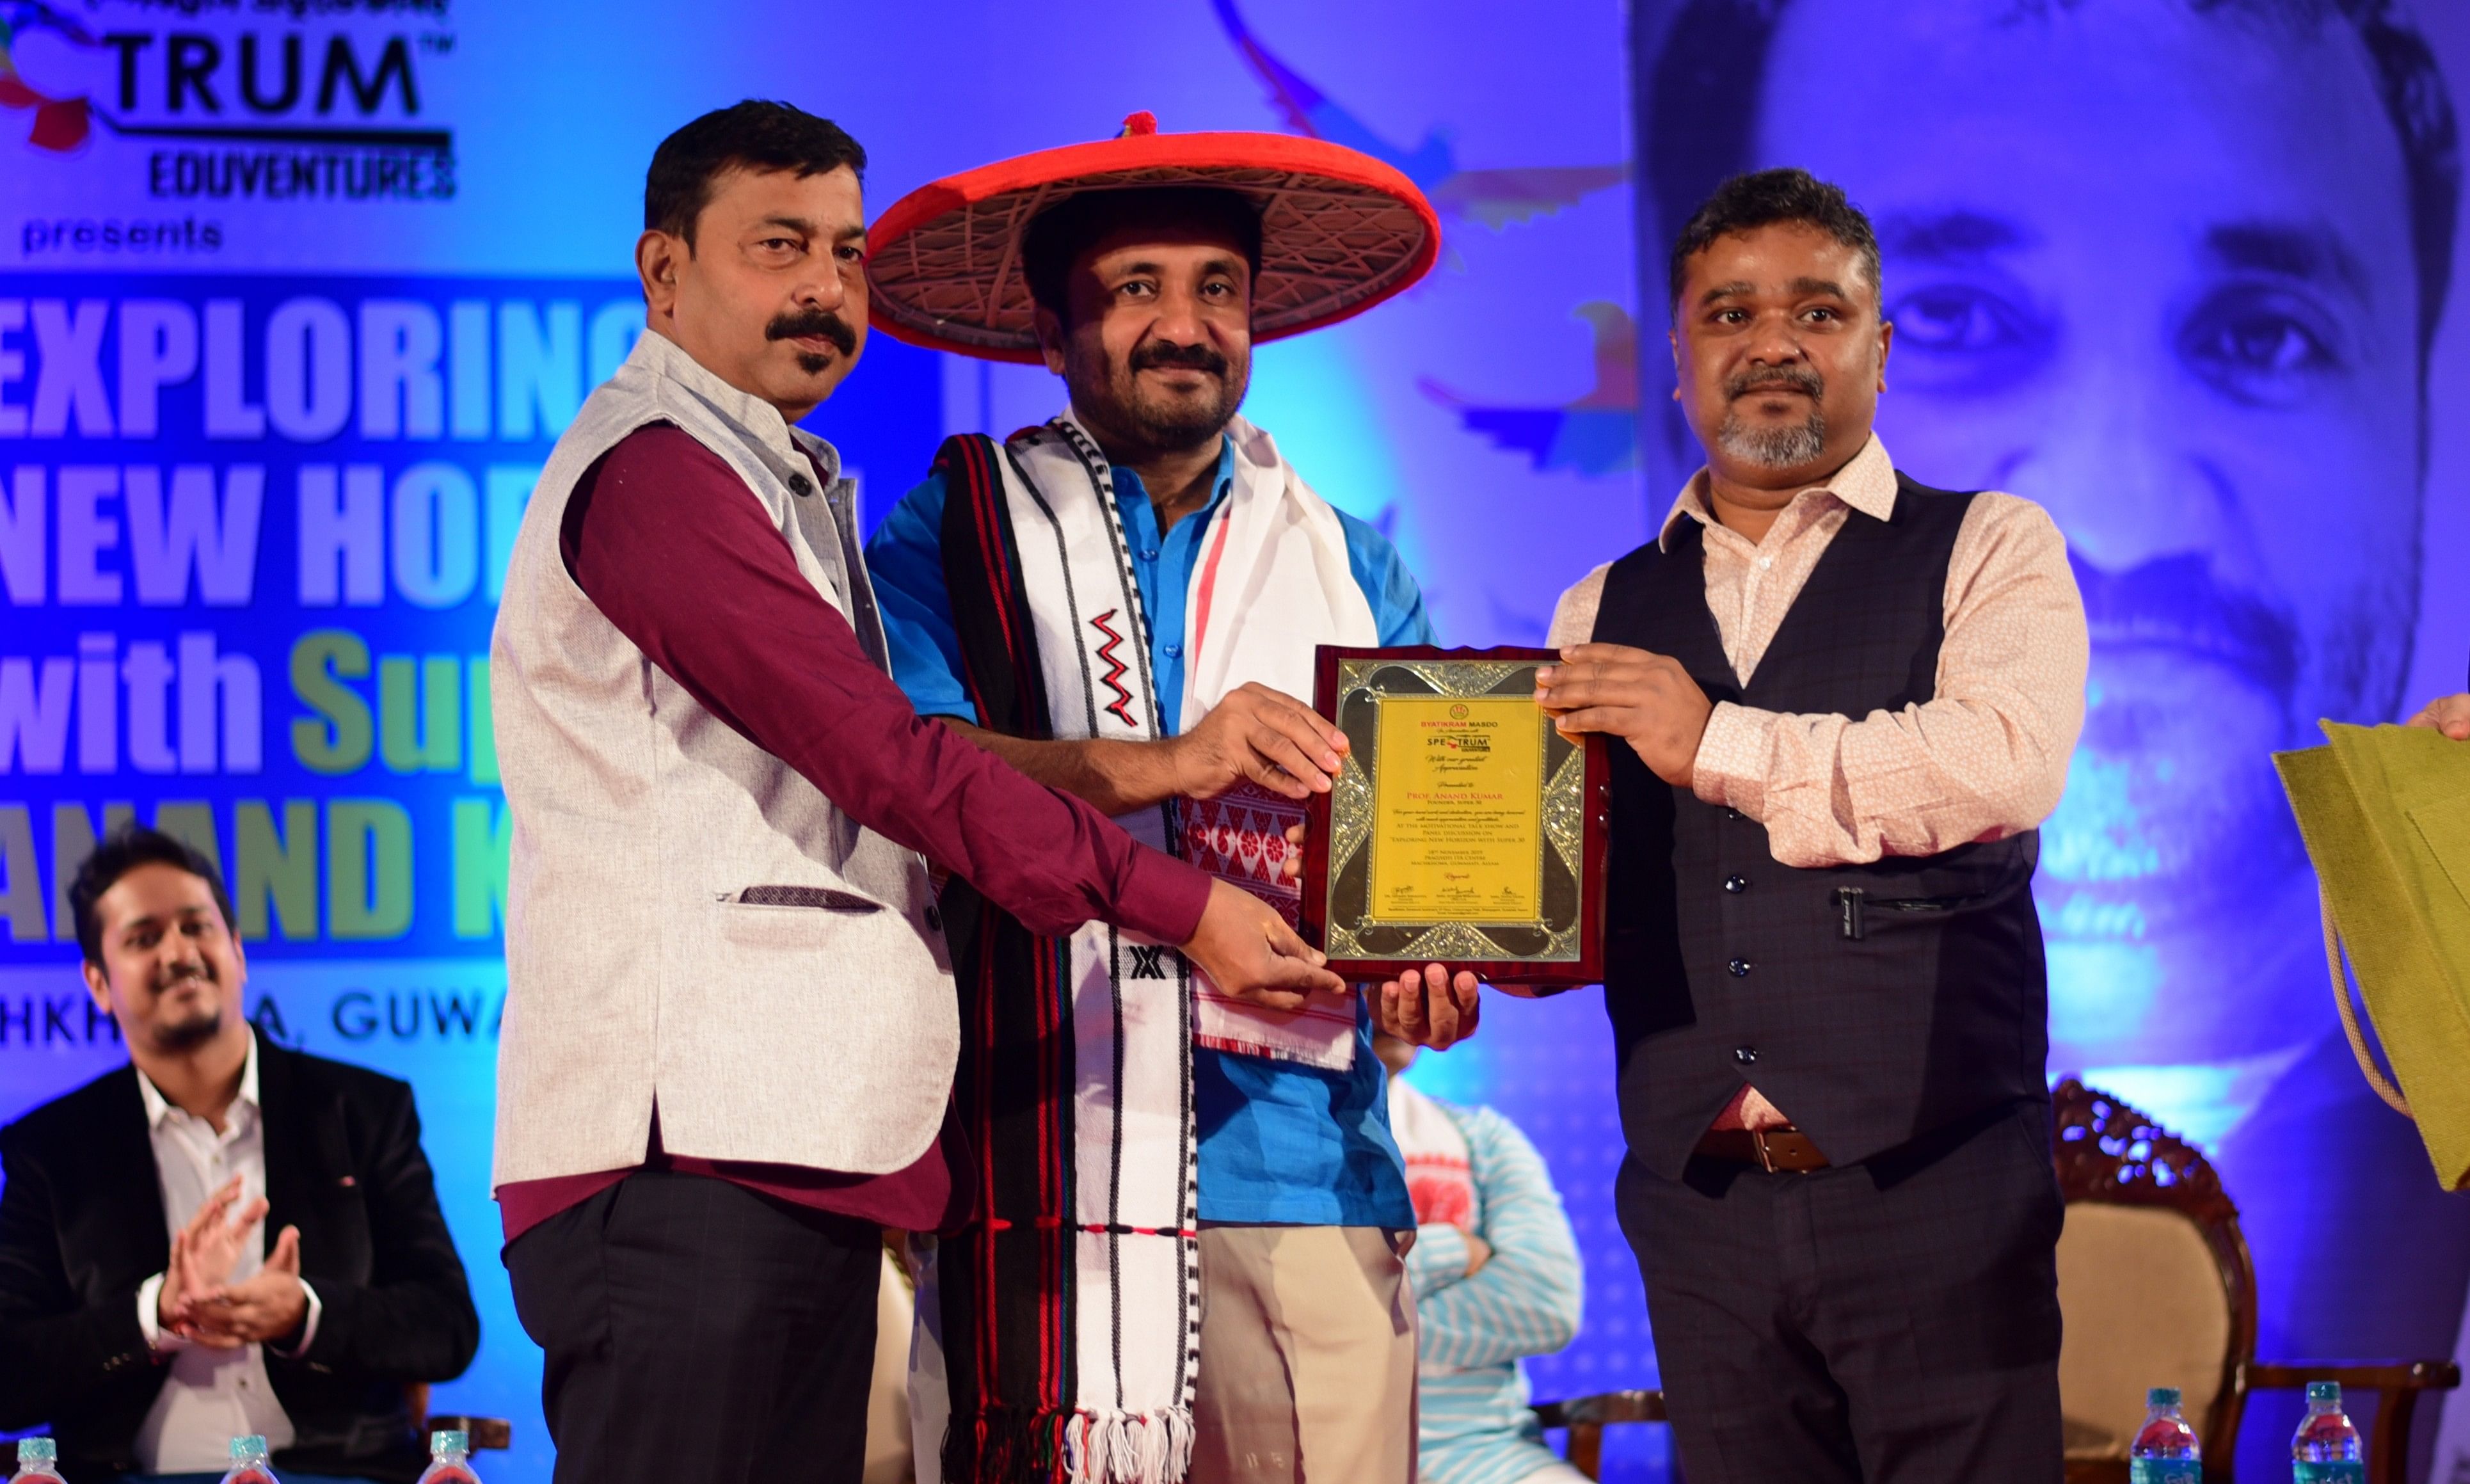 Anand Kumar, founder of Super 30 being felicitated in Guwahati recently. (File photo)